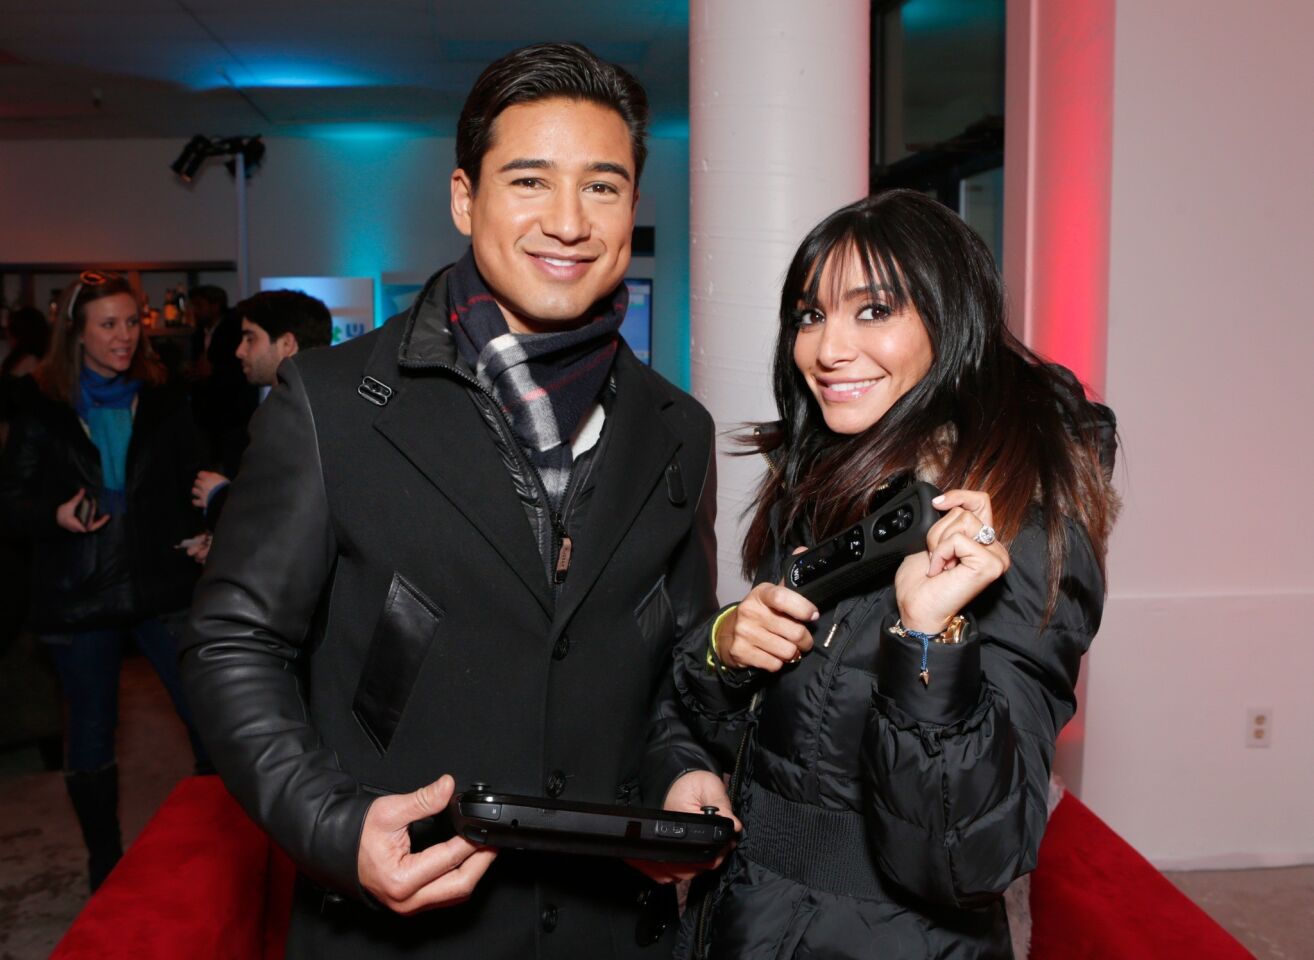 Mario Lopez's wife Courtney is pregnant with her second baby with the "Extra" host. The couple married in December 2012 and made the announcement in February 2013 on Lopez's show where his 2-year-old daughter Gia Francesca was seen wearing a T-shirt that said "Big Sister Gia." "I am the happiest father in the world," said Lopez, 39. "We cannot wait to welcome baby Lopez number two into our lives." The child is due in the summer. MORE: Mario Lopez expecting another baby with wife Courtney